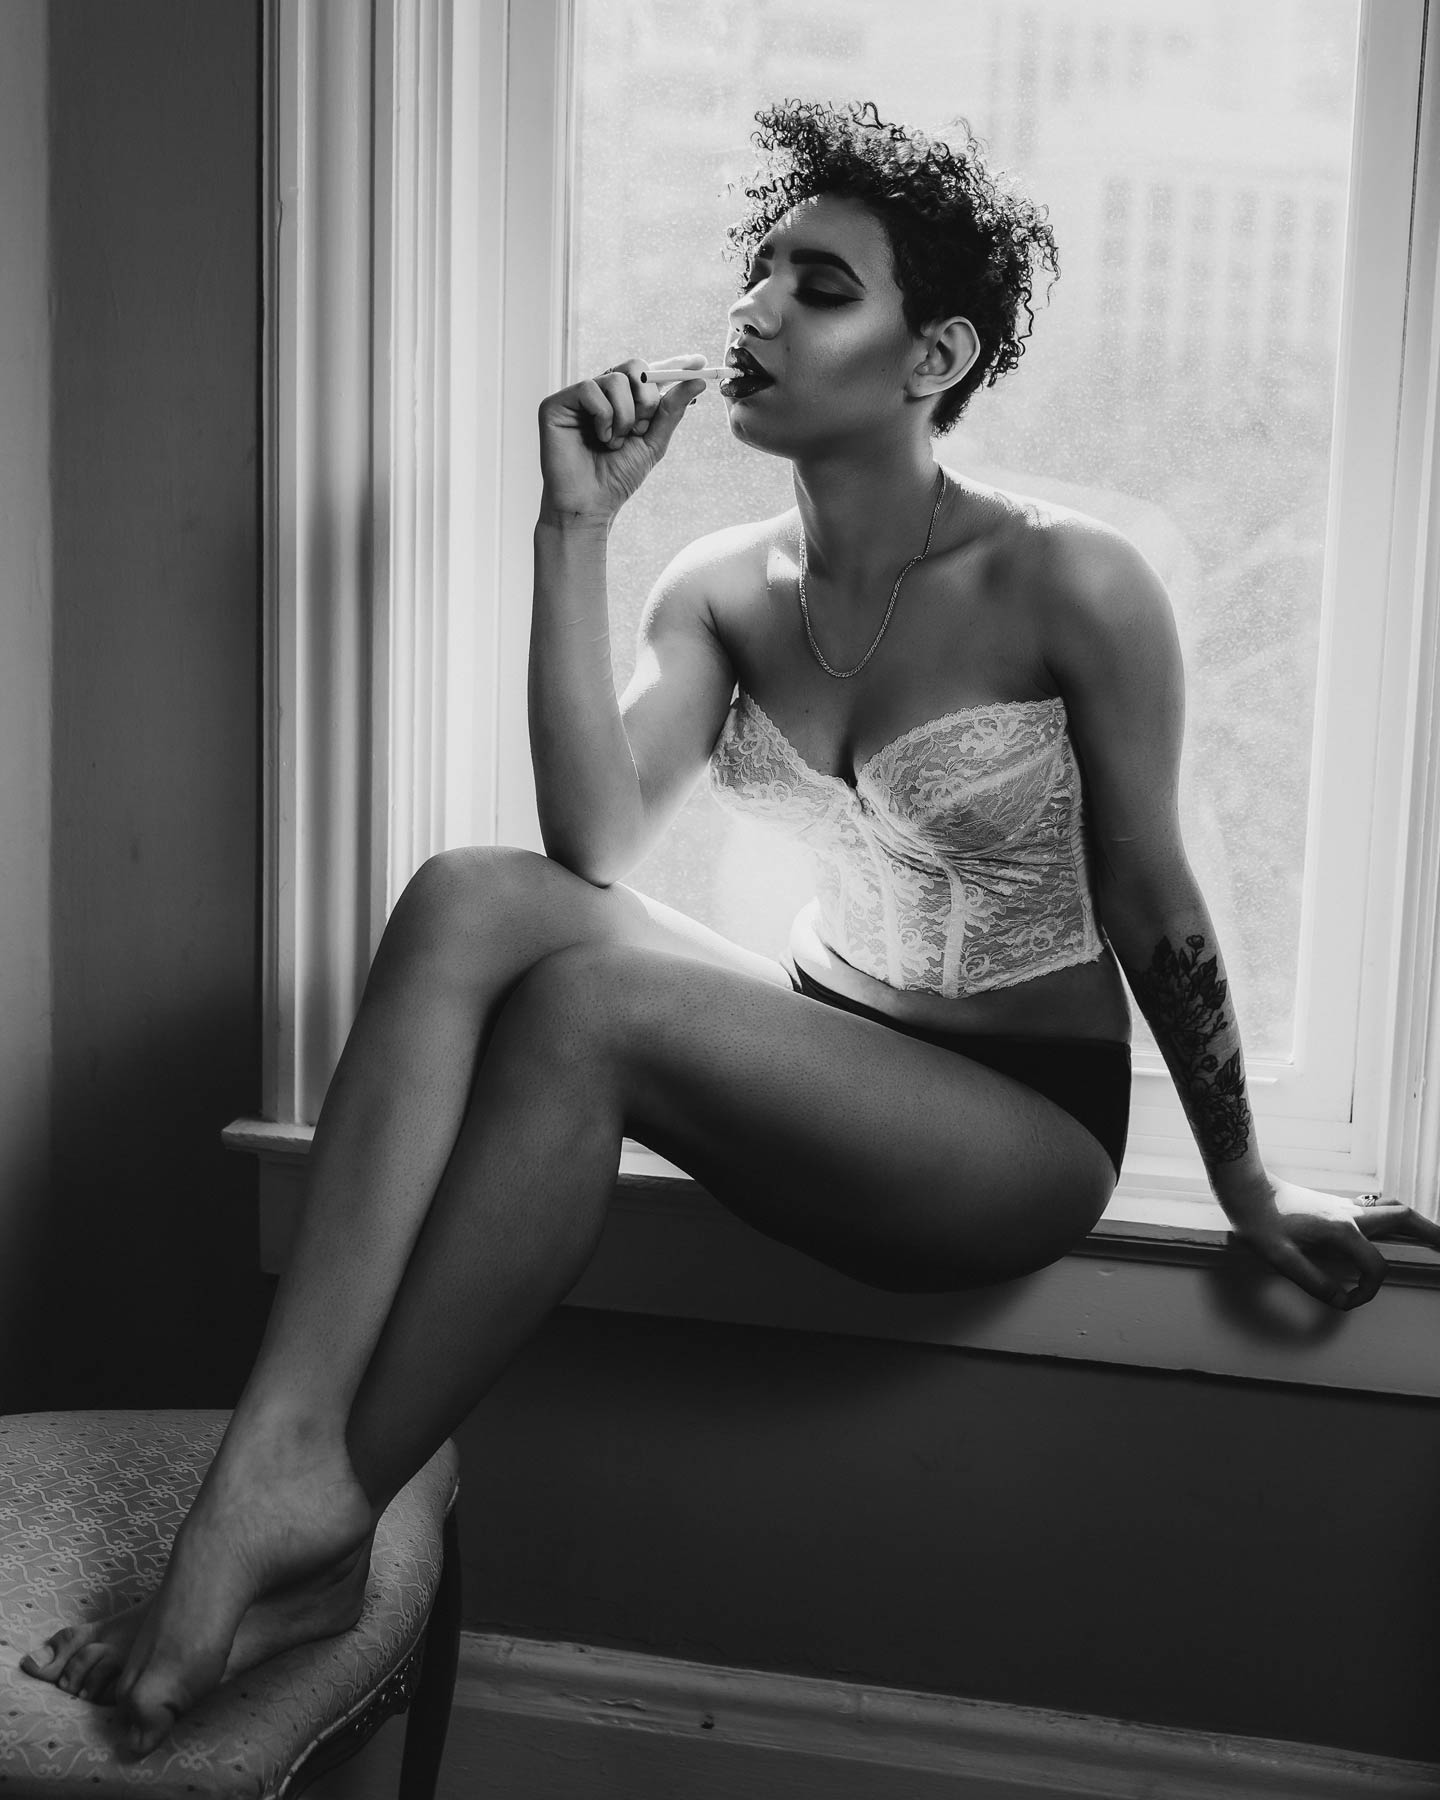 Black and white photography of a woman in lingerie.